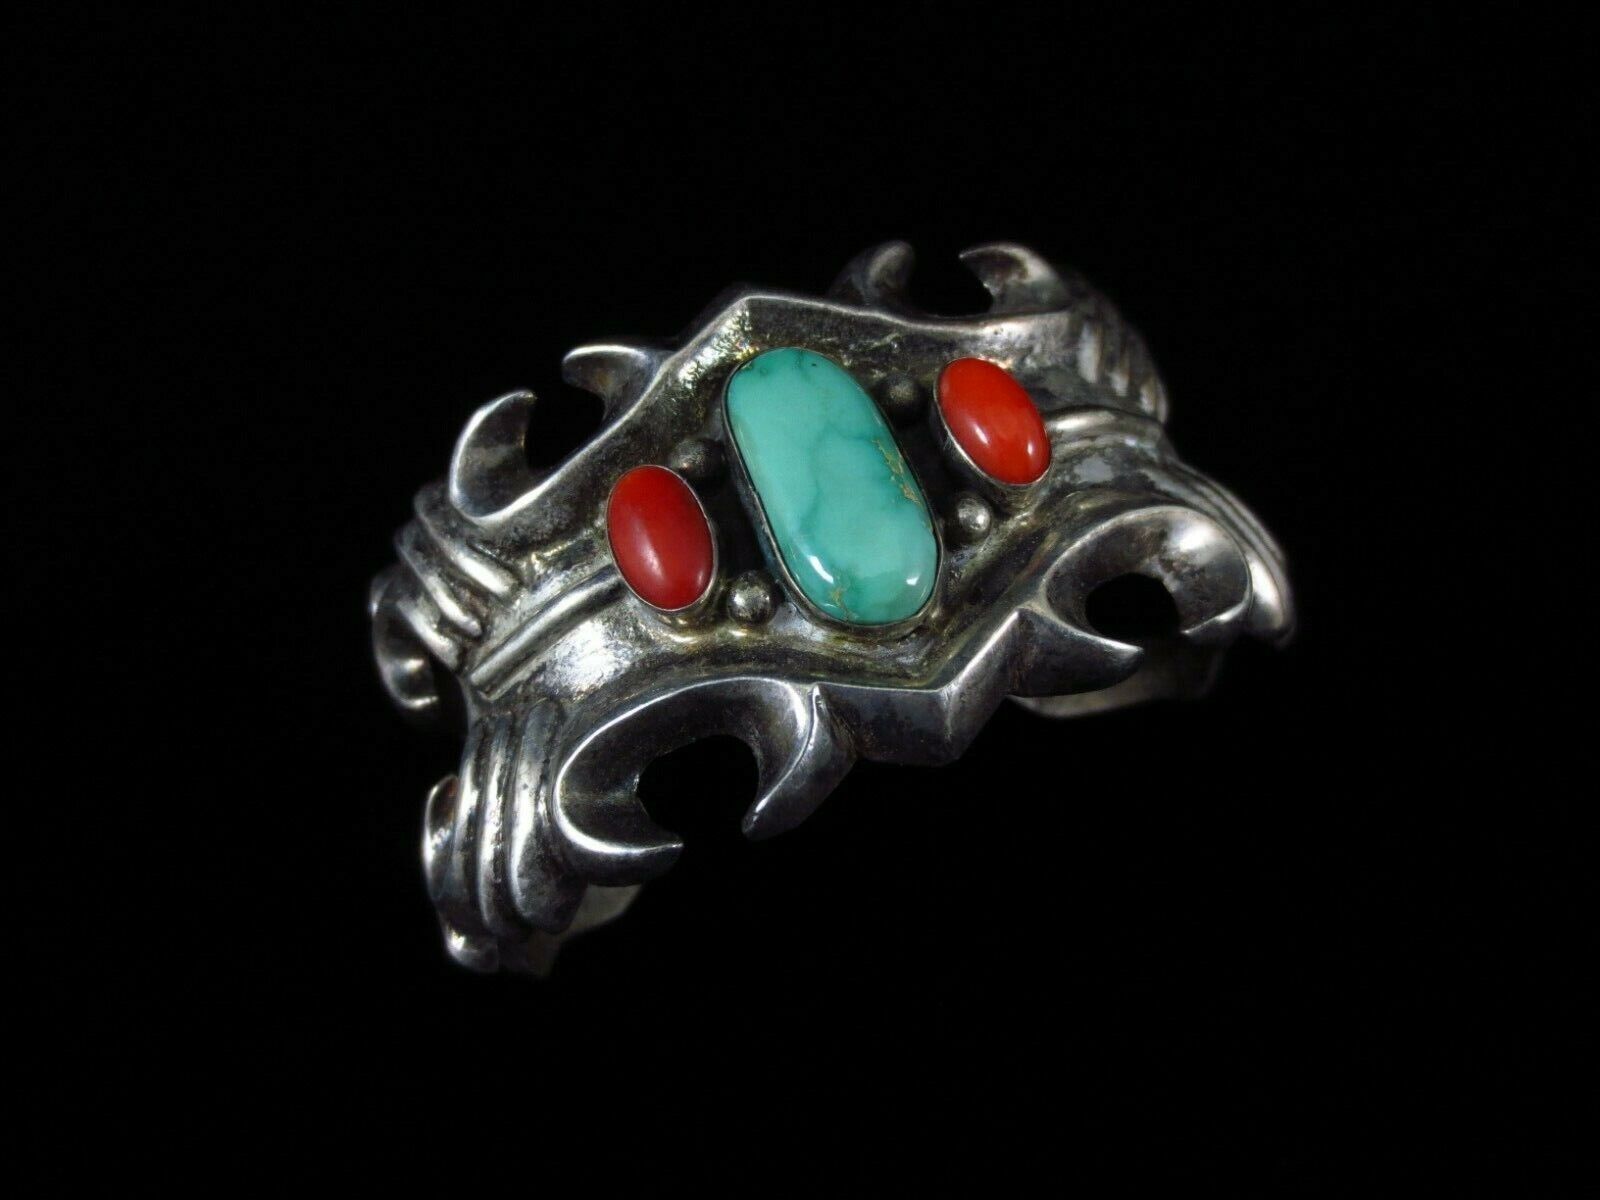 Vintage Navajo Bracelet - Coin Silver, Turquoise, and Coral - Scorpion